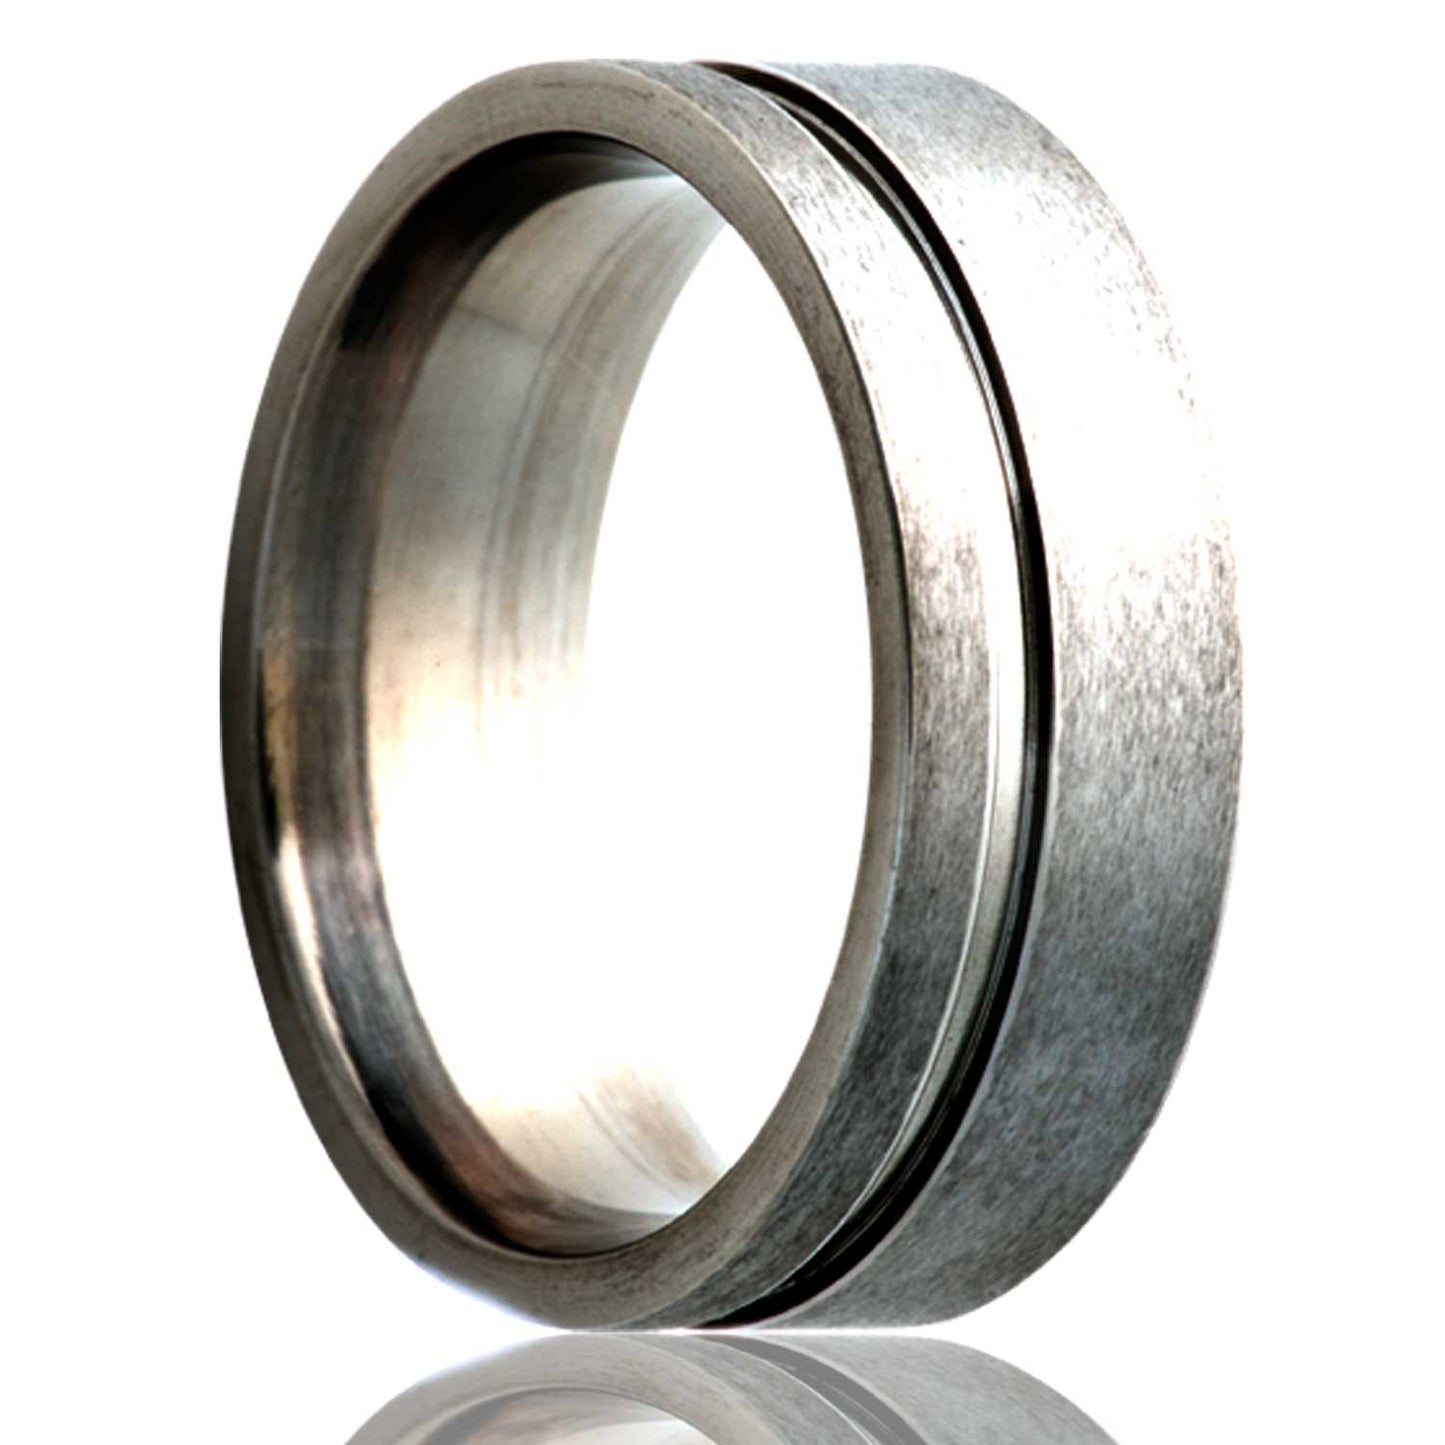 A satin finish asymmetrical grooved titanium wedding band displayed on a neutral white background.